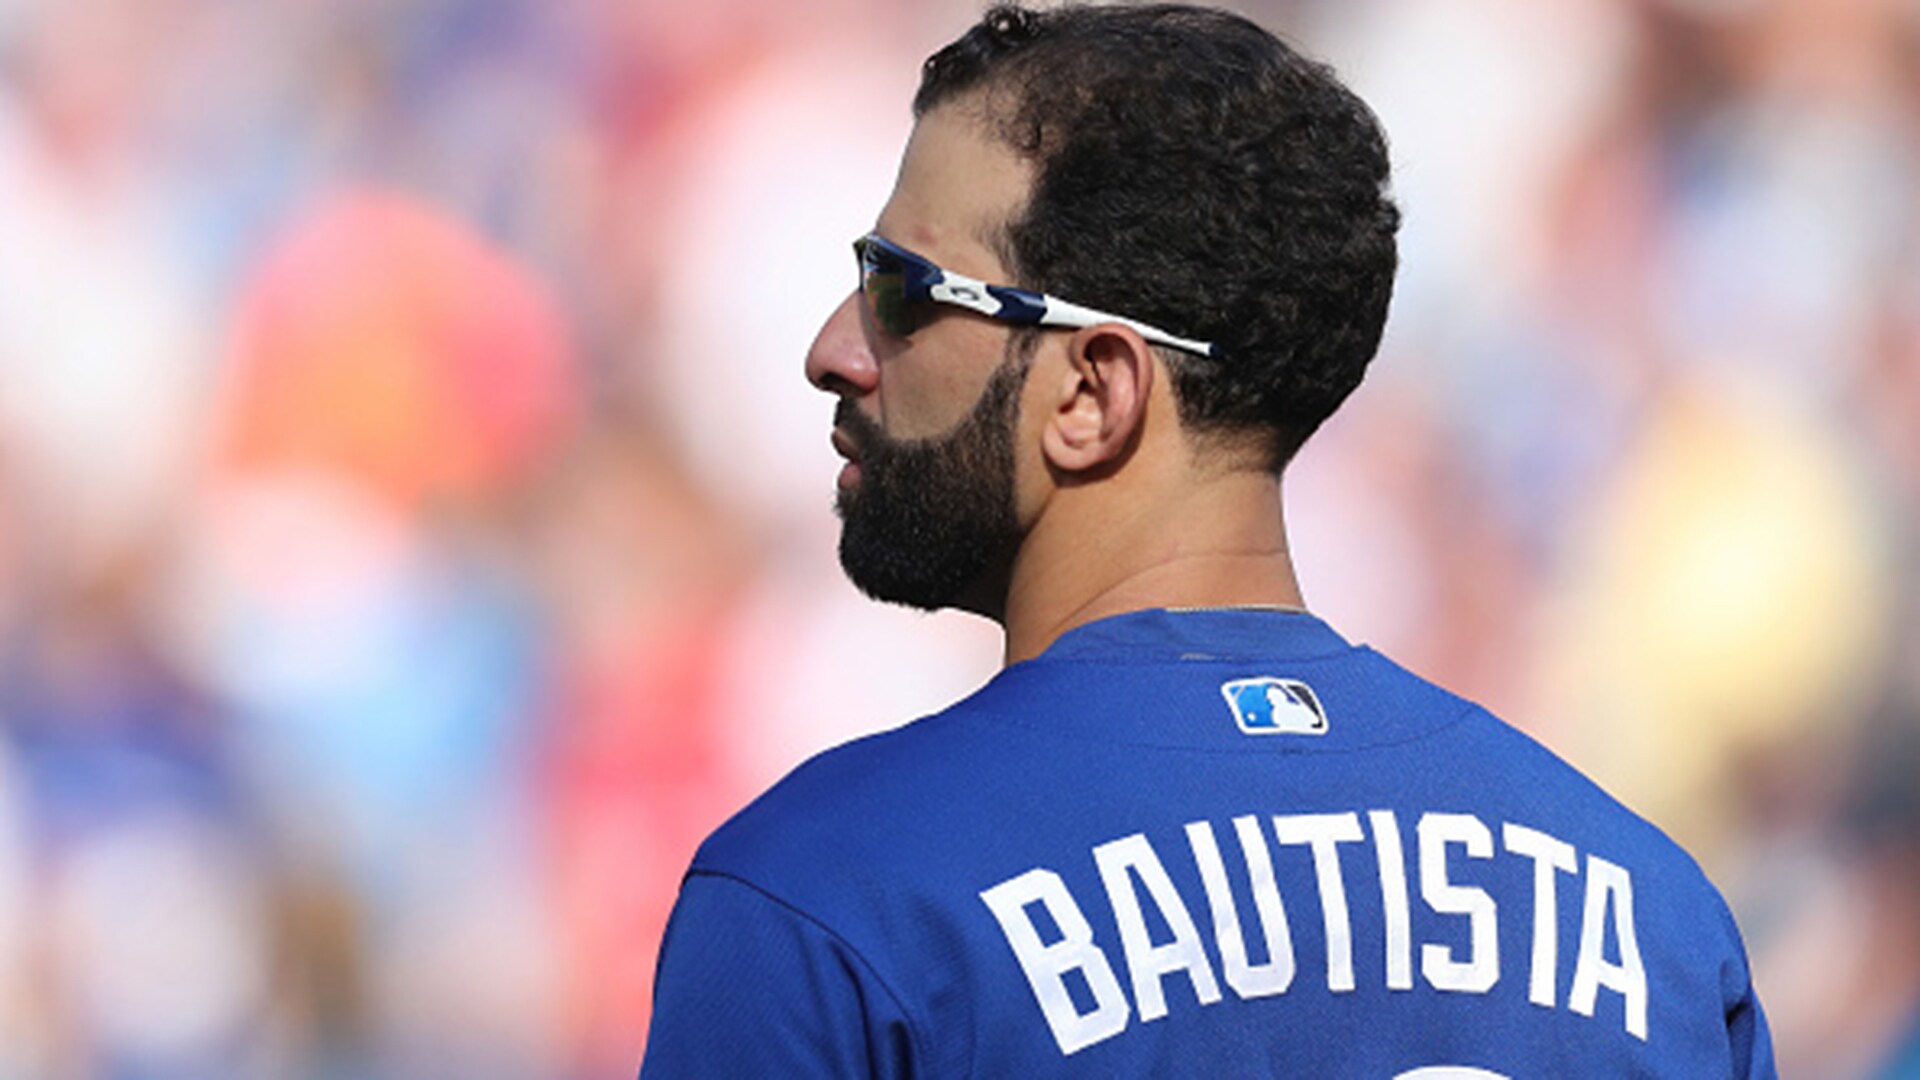 Blue Jays officially decline Jose Bautista's 2018 mutual option